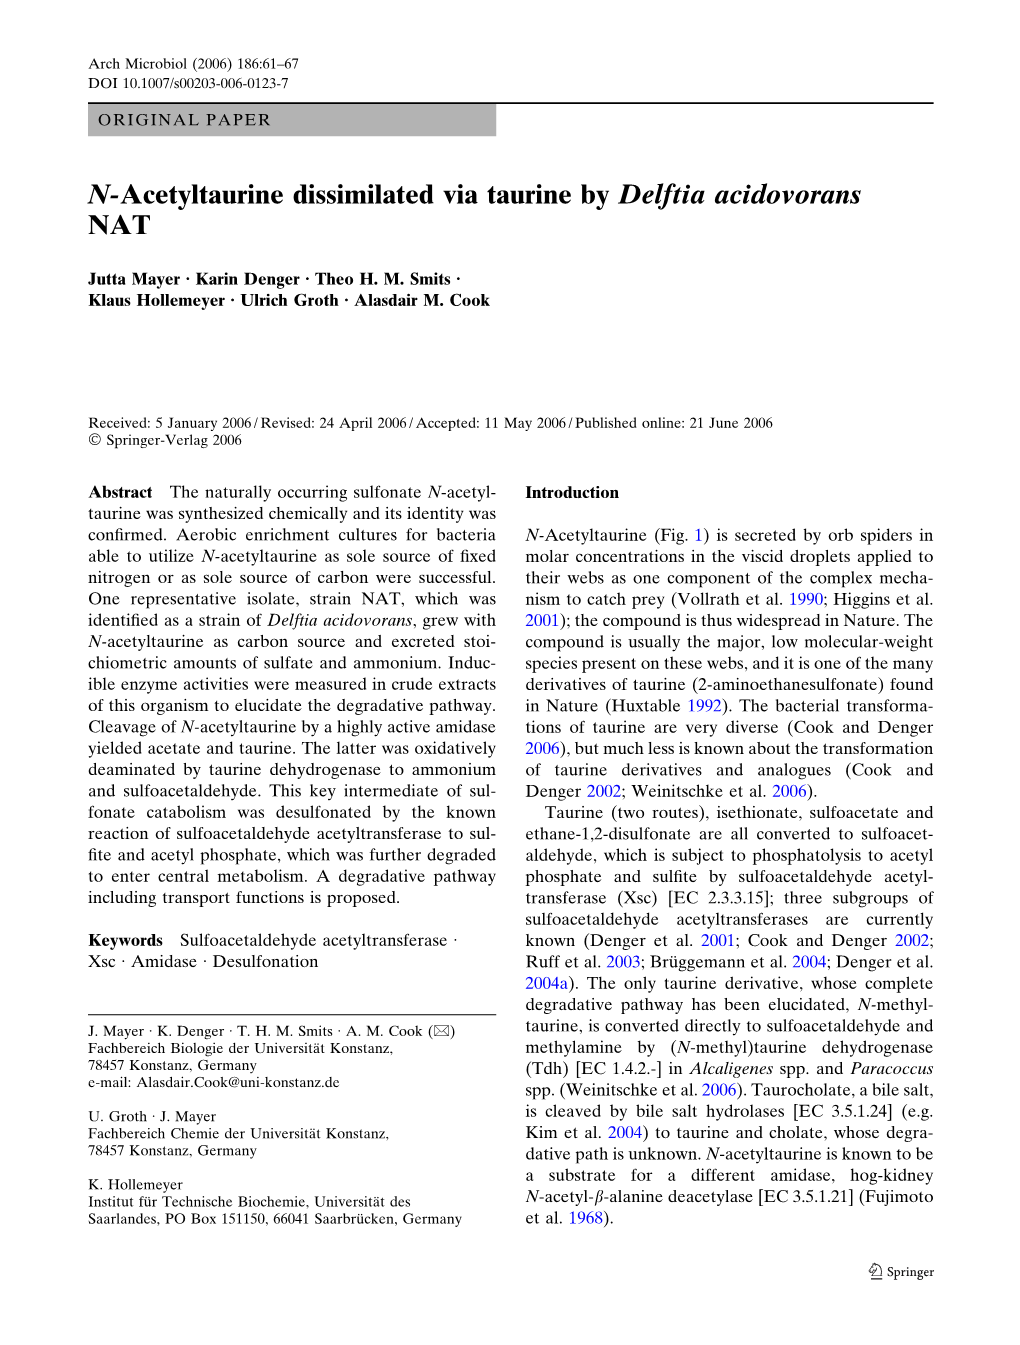 N-Acetyltaurine Dissimilated Via Taurine by Delftia Acidovorans NAT